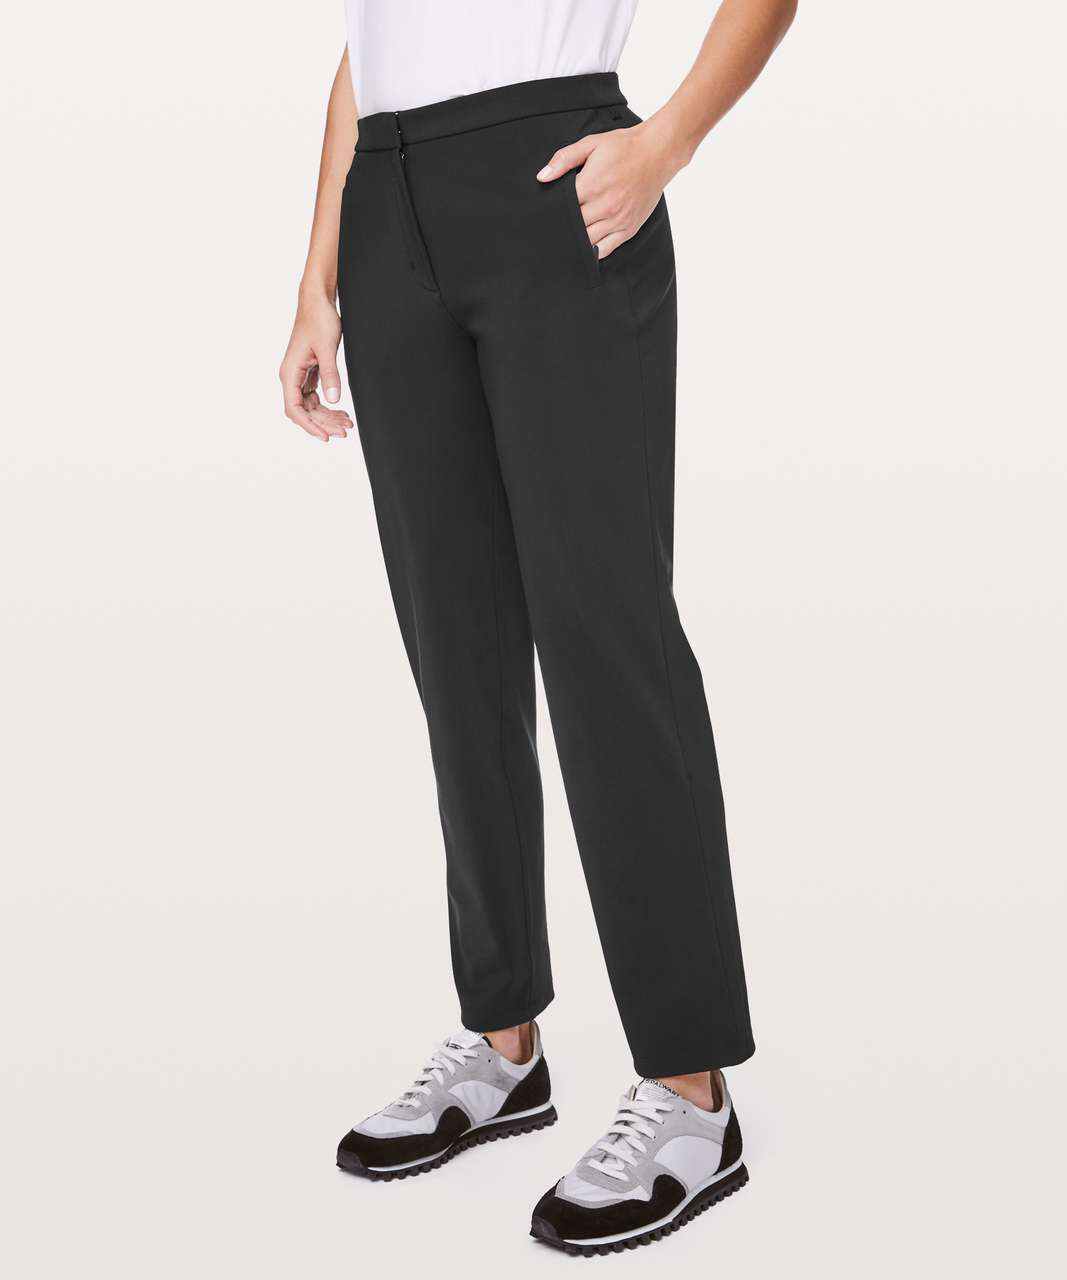 lululemon on the move pant review